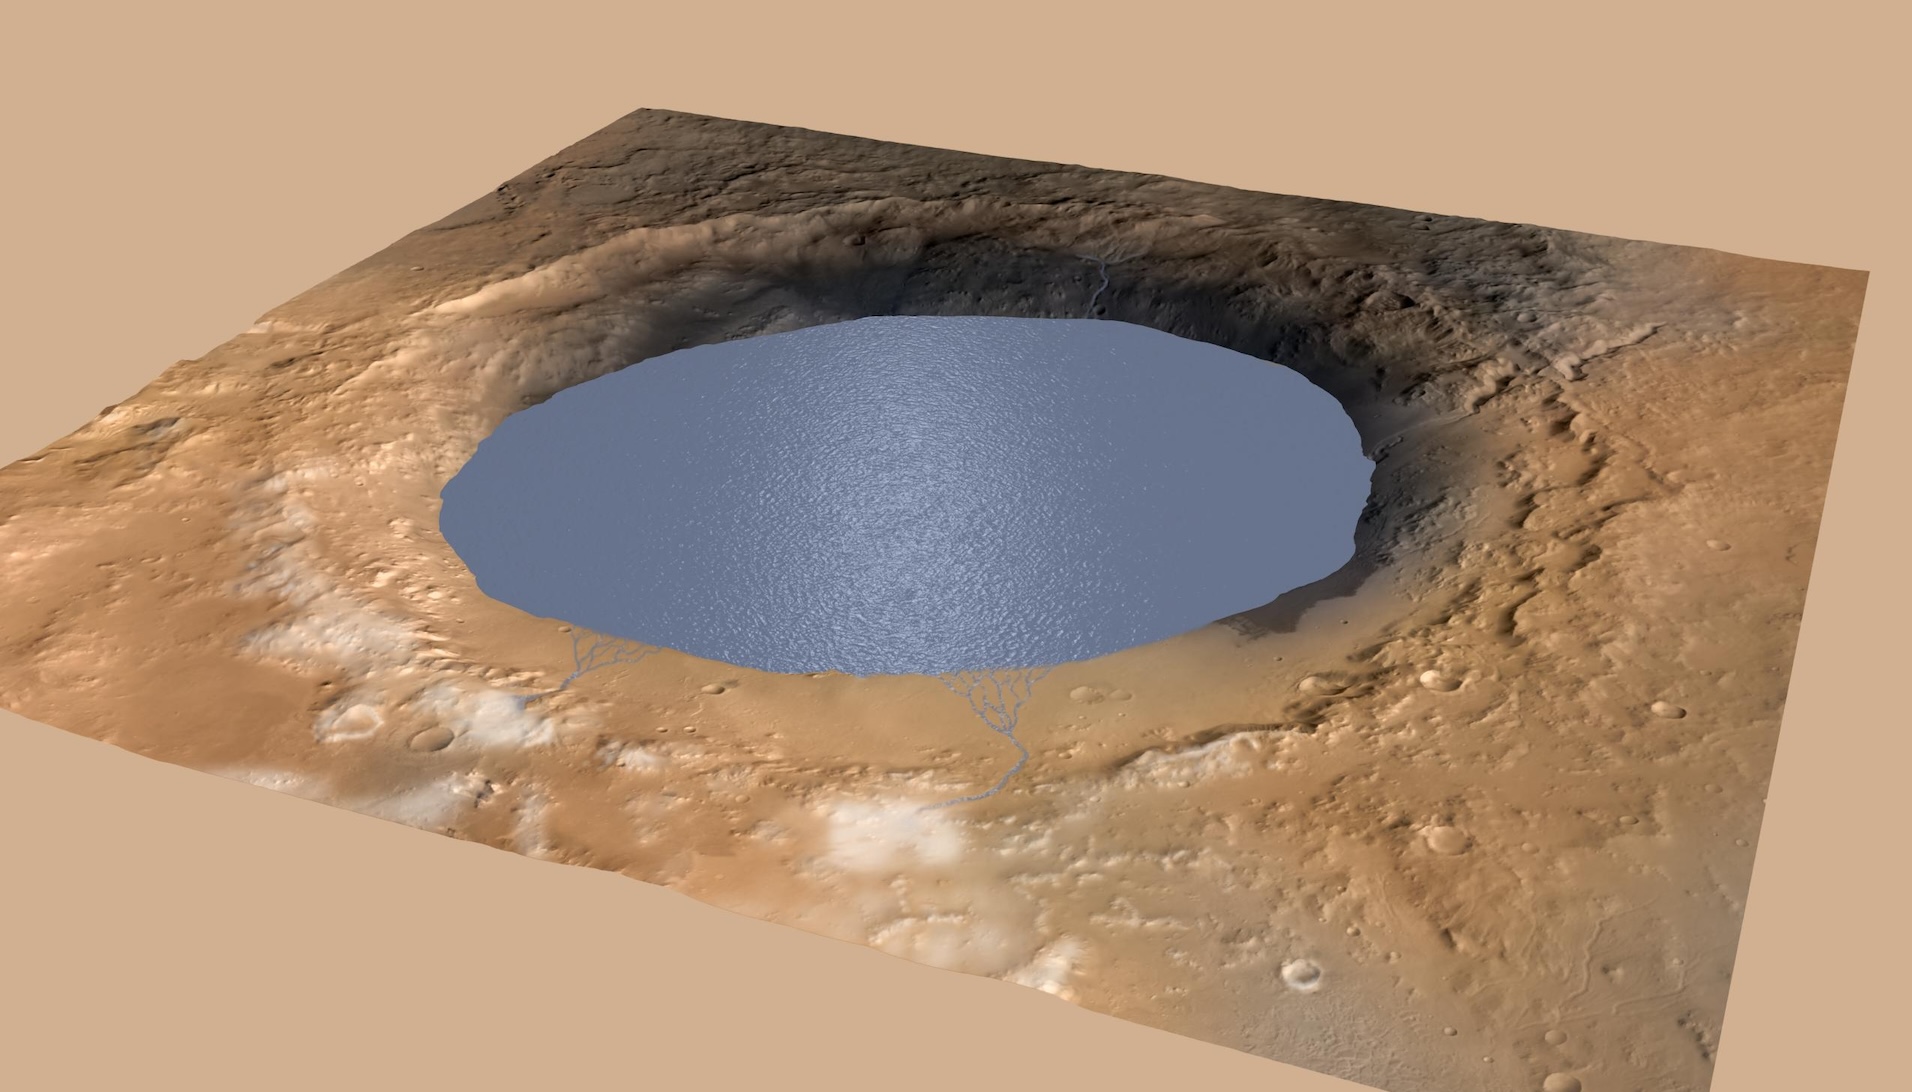 mars may have been more earth-like than we thought, discovery of oxygen-rich rocks reveals